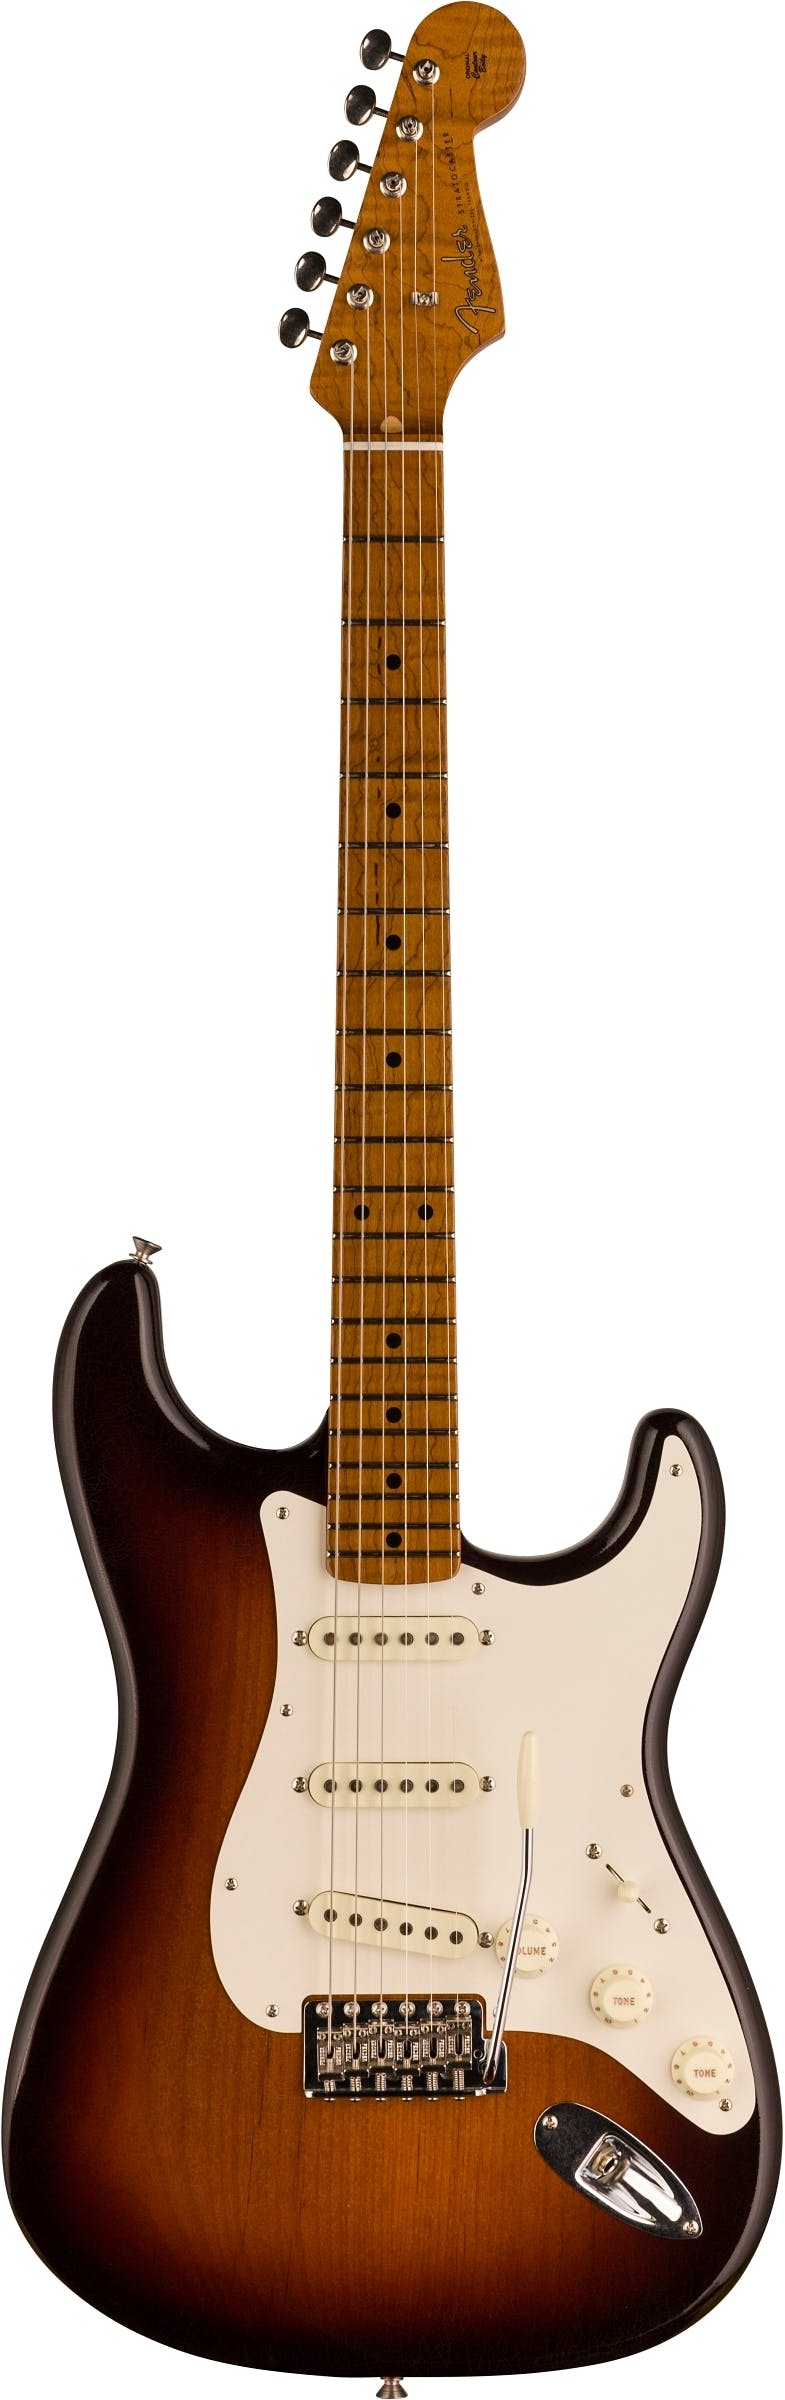 Fender Custom Shop Limited Edition Roasted '50s Stratocaster DLX Closet  Classic in Aged Wide-Fade Chocolate 2-Colour Sunburst - Andertons Music Co.